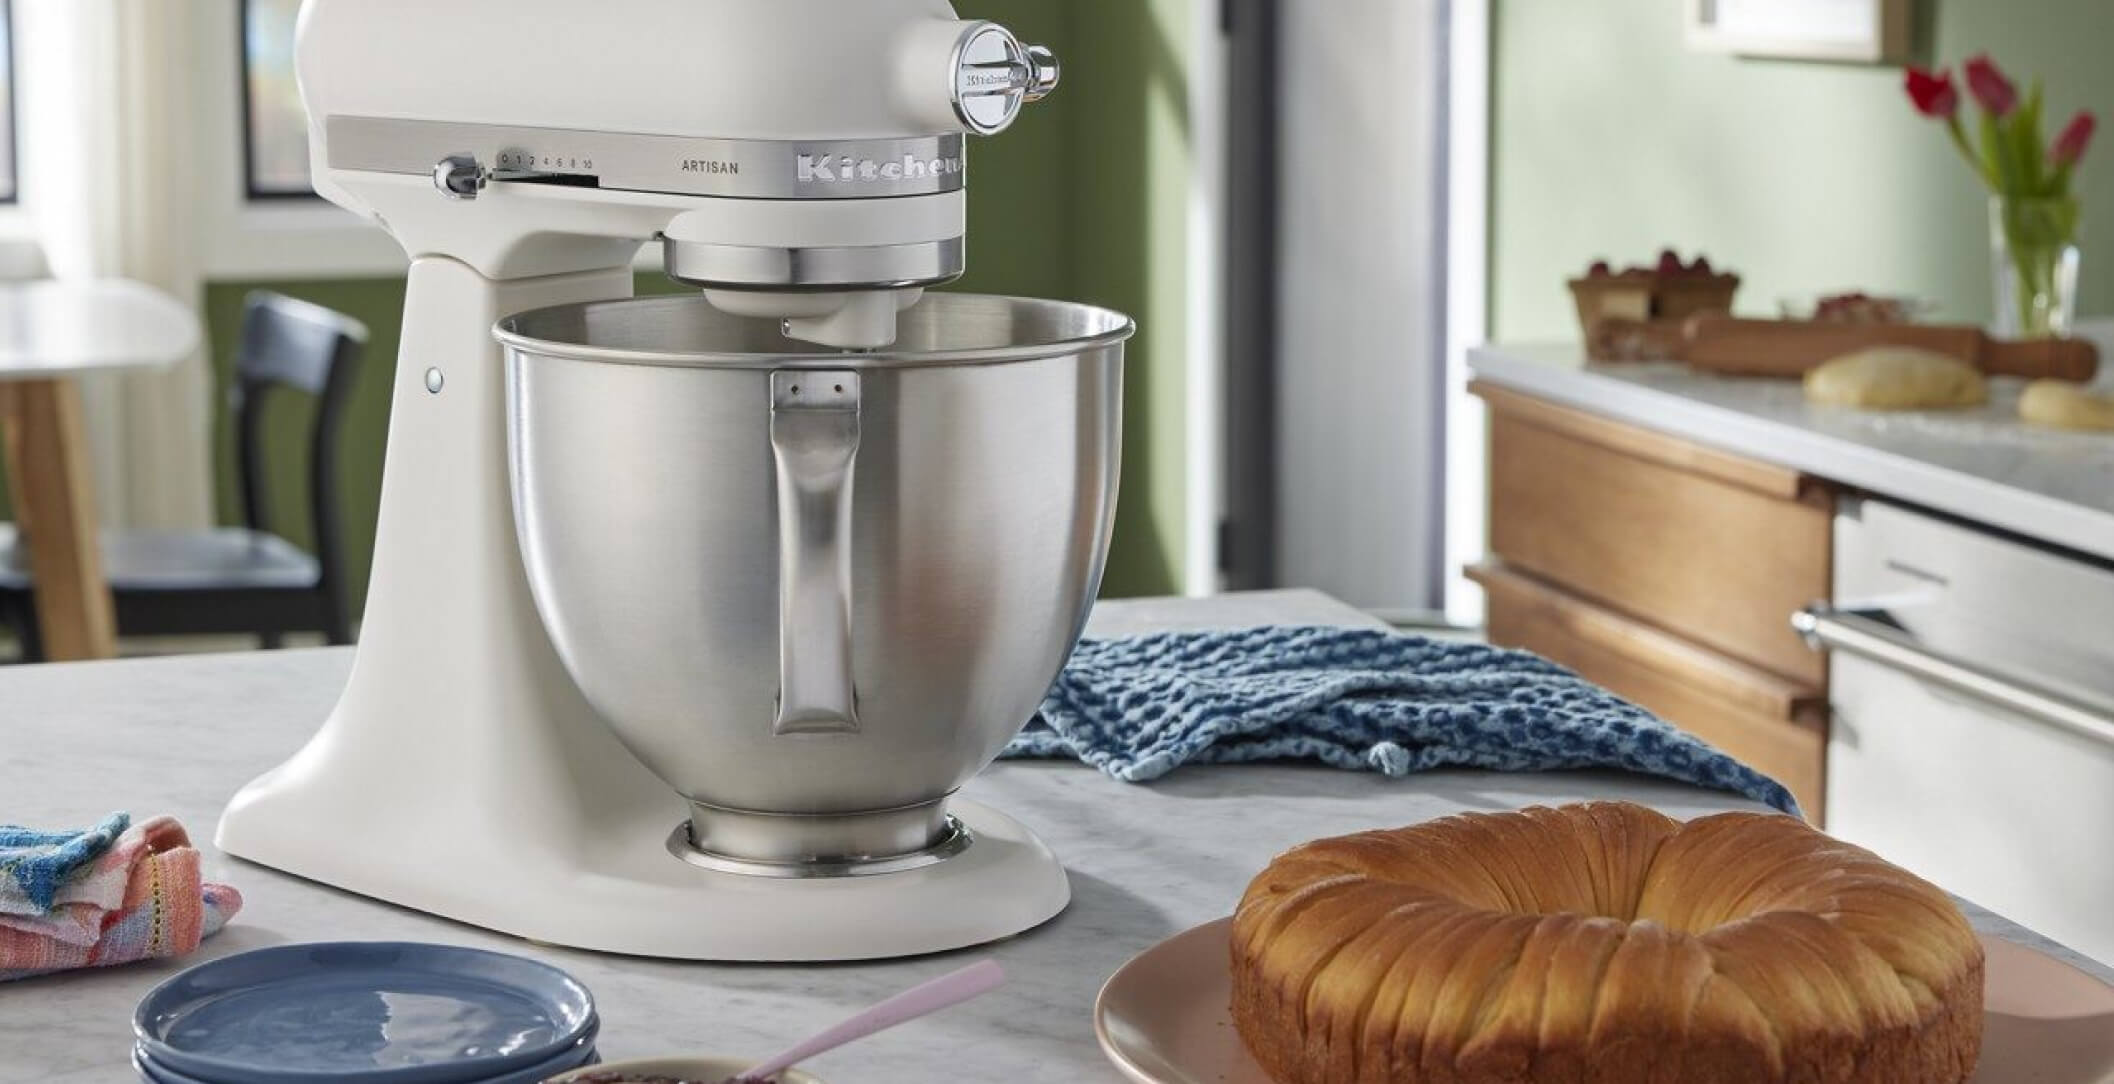 A Porcelain White Tilt-Head Stand Mixer on a countertop near a baked pastry ring.